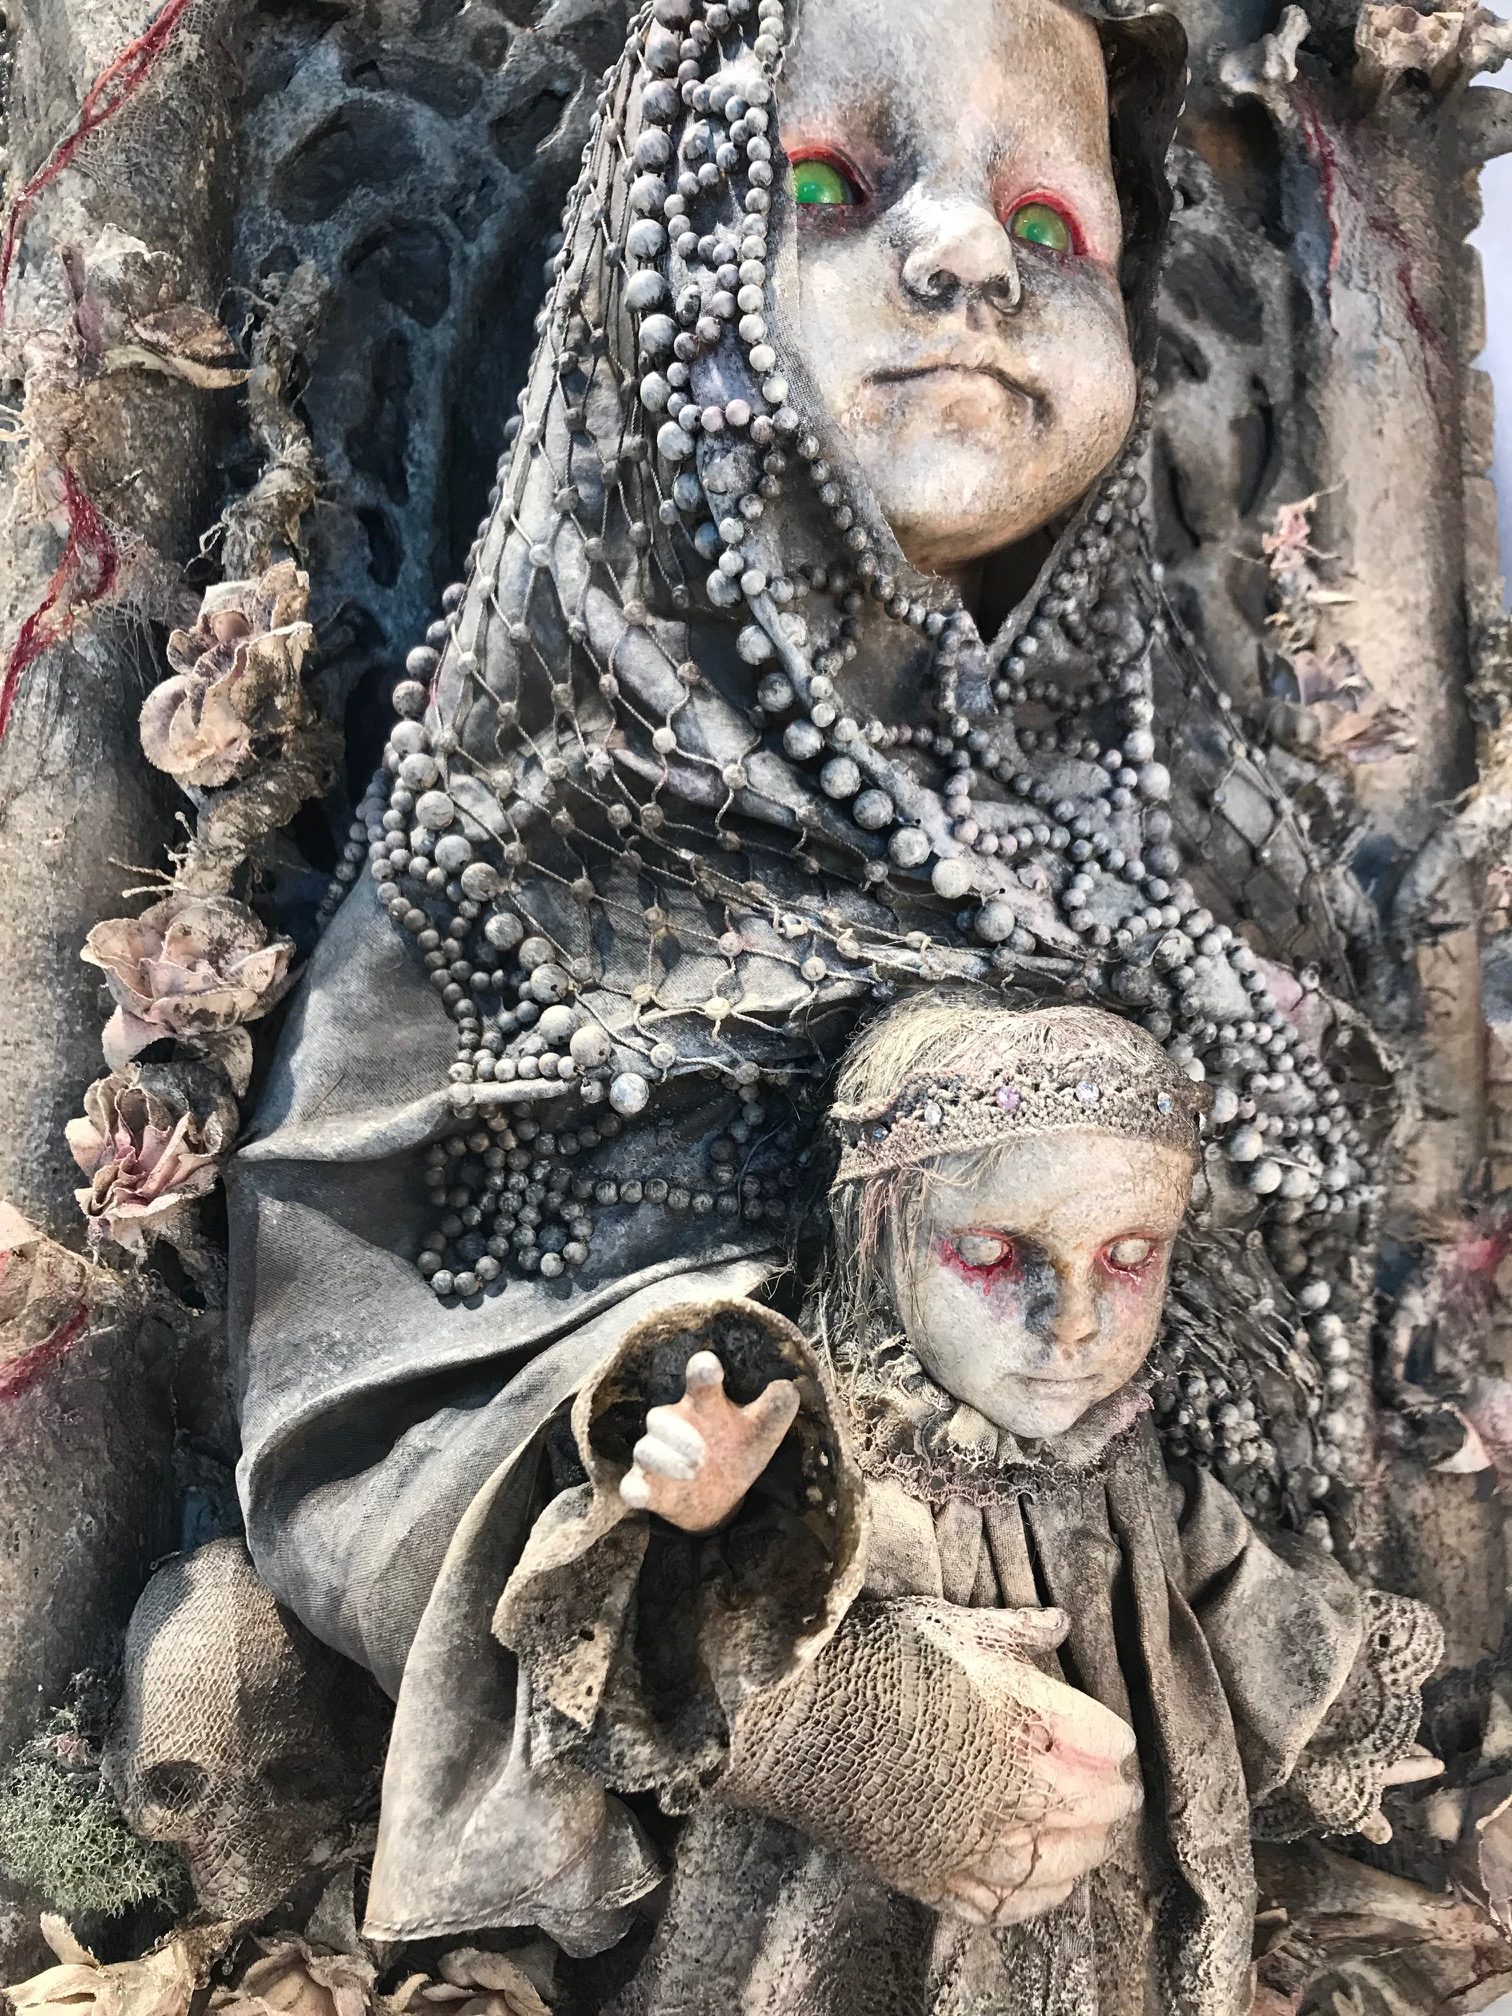 close up mixed media assemblage plaque repainted sainted robed baby doll holding a baby